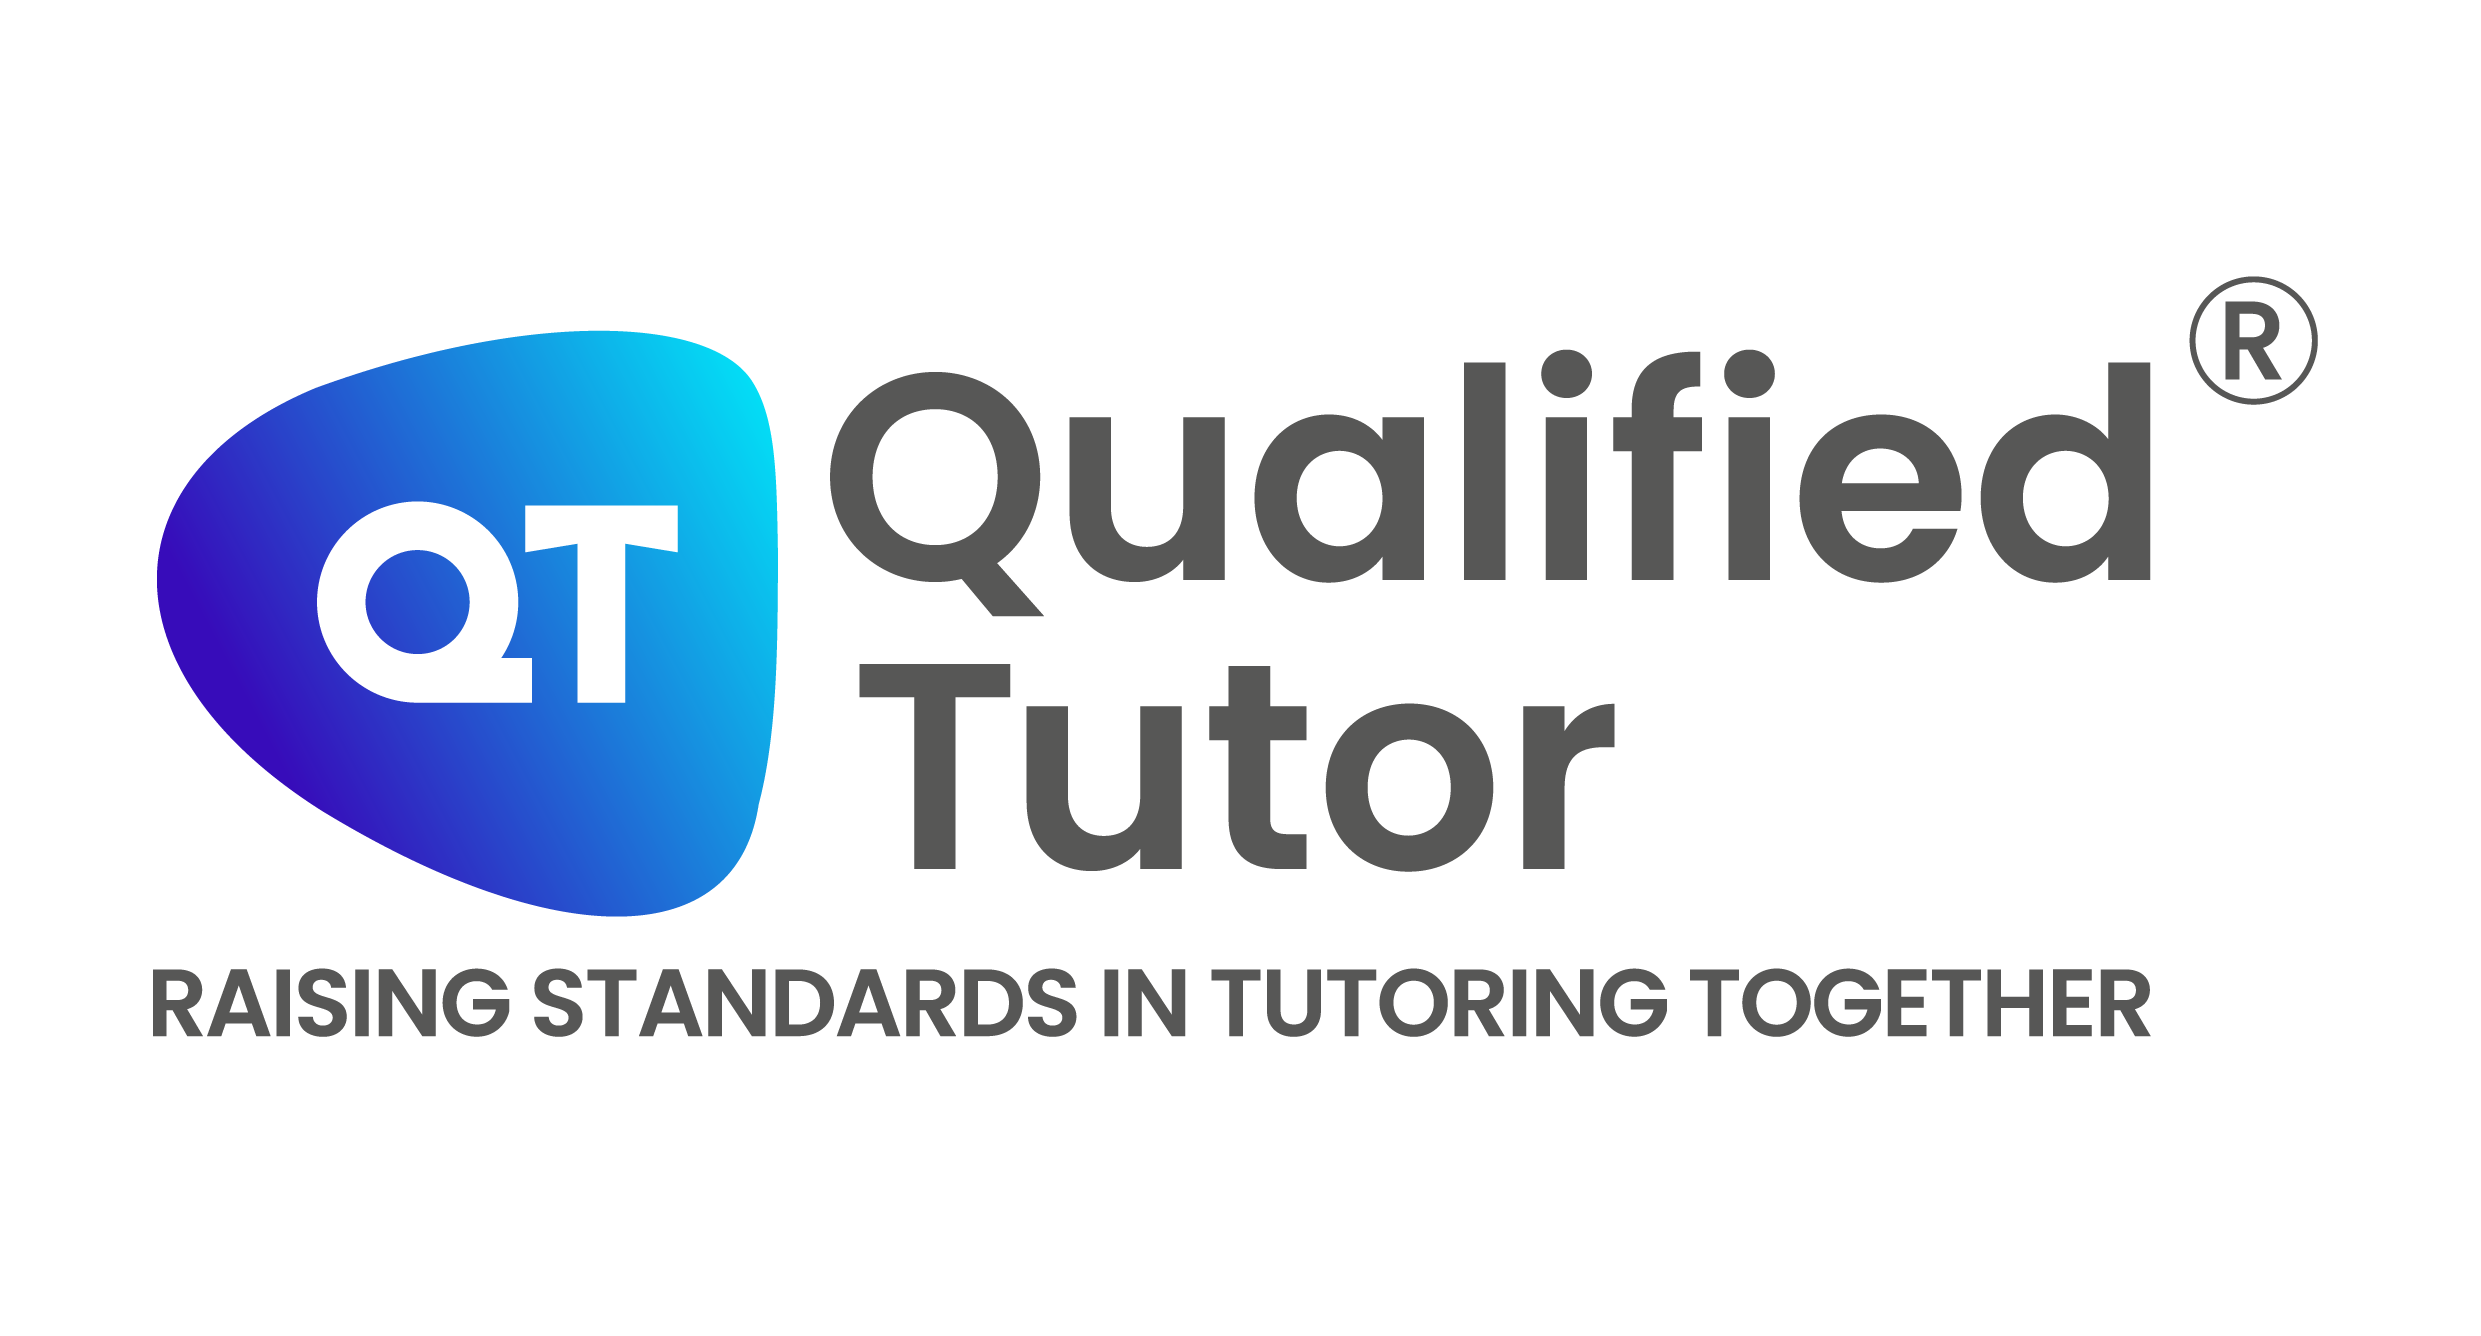 Customize online this Hand-drawn Your Favorite Tutor Logo template